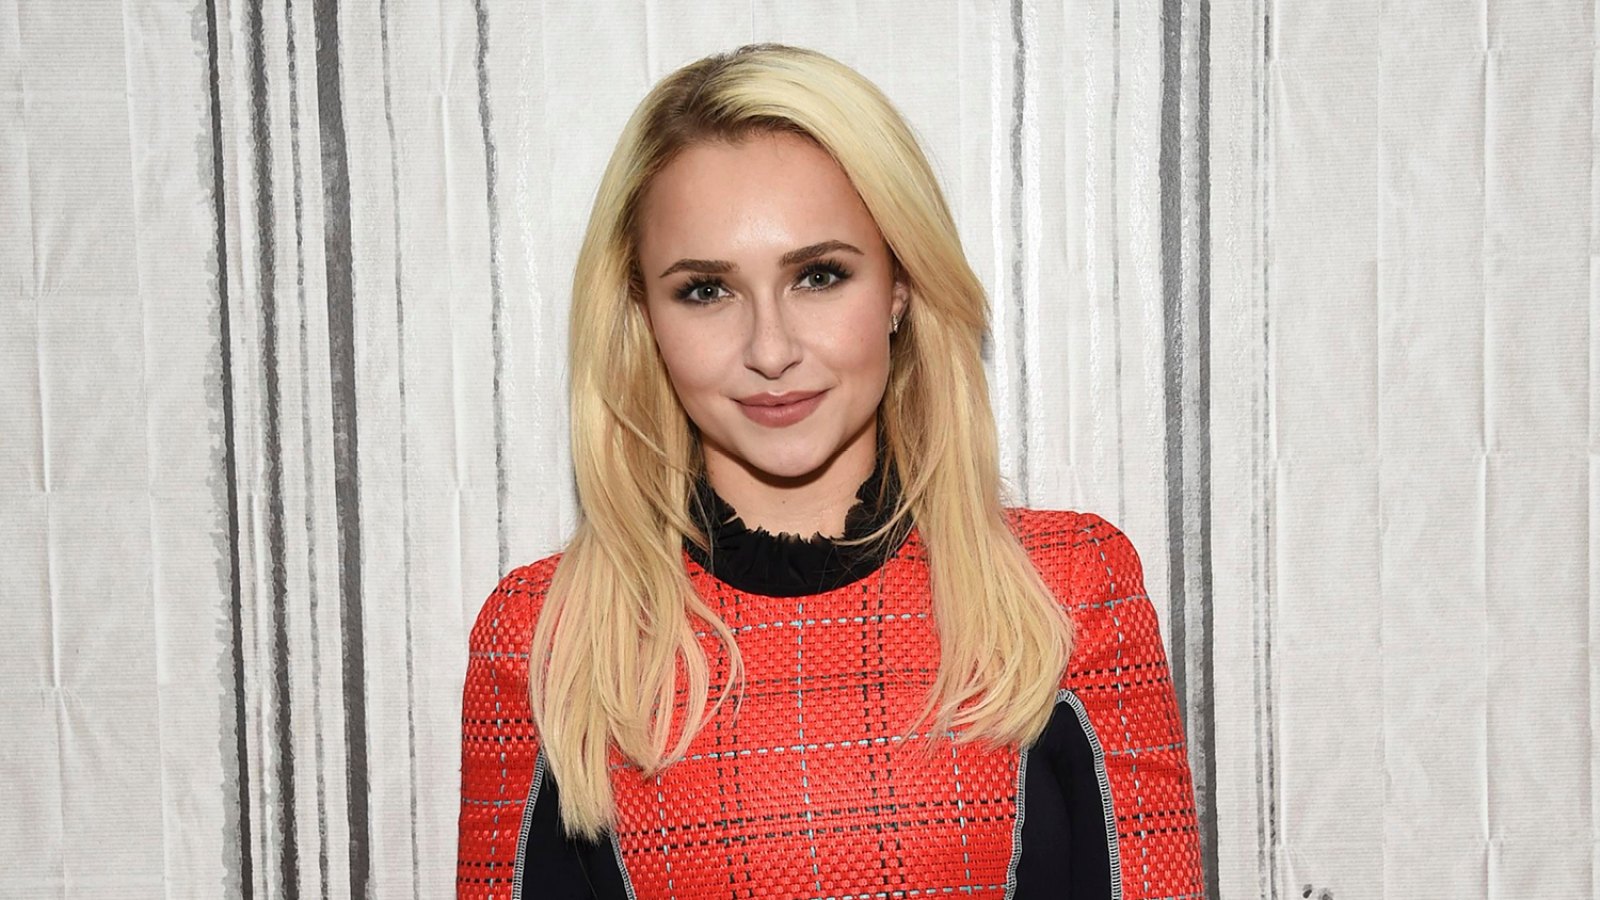 Hayden Panettiere returns to social media after six-month hiatus.